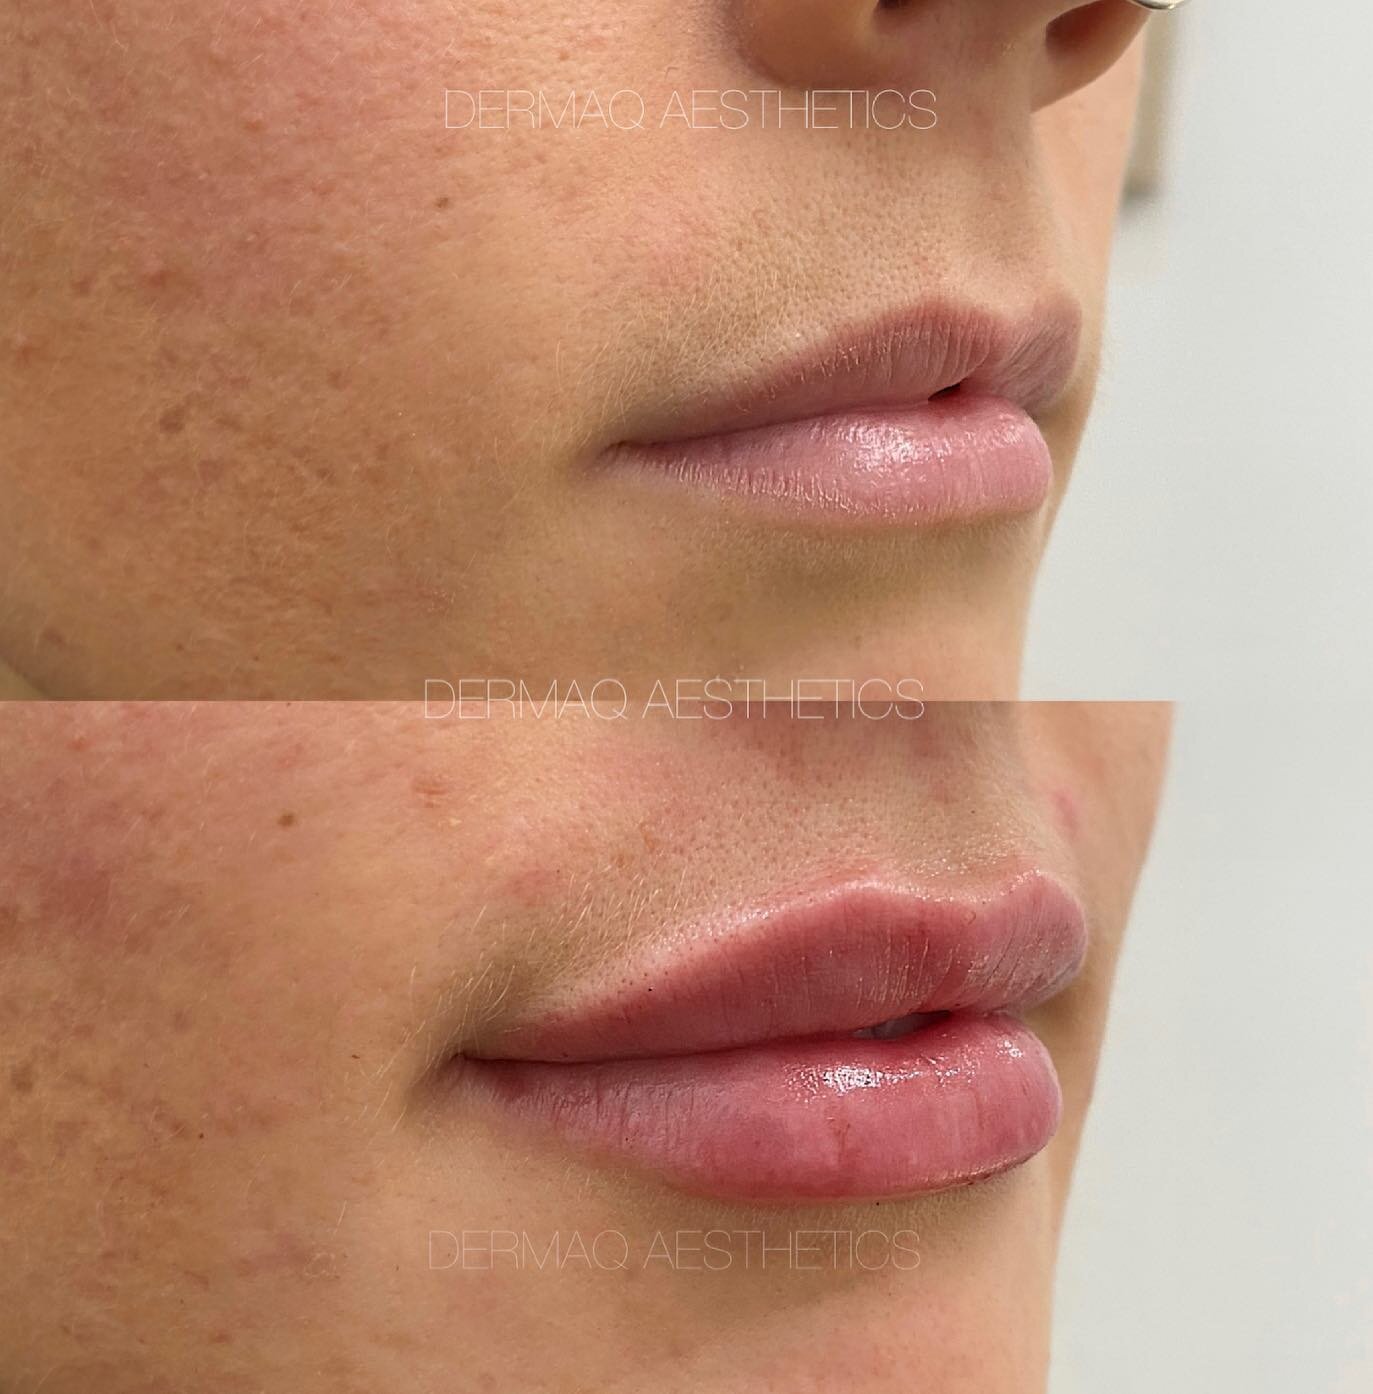 Soft and natural lip enhancement 🤍

💉 Treatment: 1ml of standard lip filler
⏰ Downtime: None. Mild bruising and swelling for 3-5 days following
⏳ Longevity: 6-8 months
👩🏼&zwj;⚕️ Injector: Madeline
📱 Bookings: dermaq.co or DM
-
-
-
-
-
#dermalfil